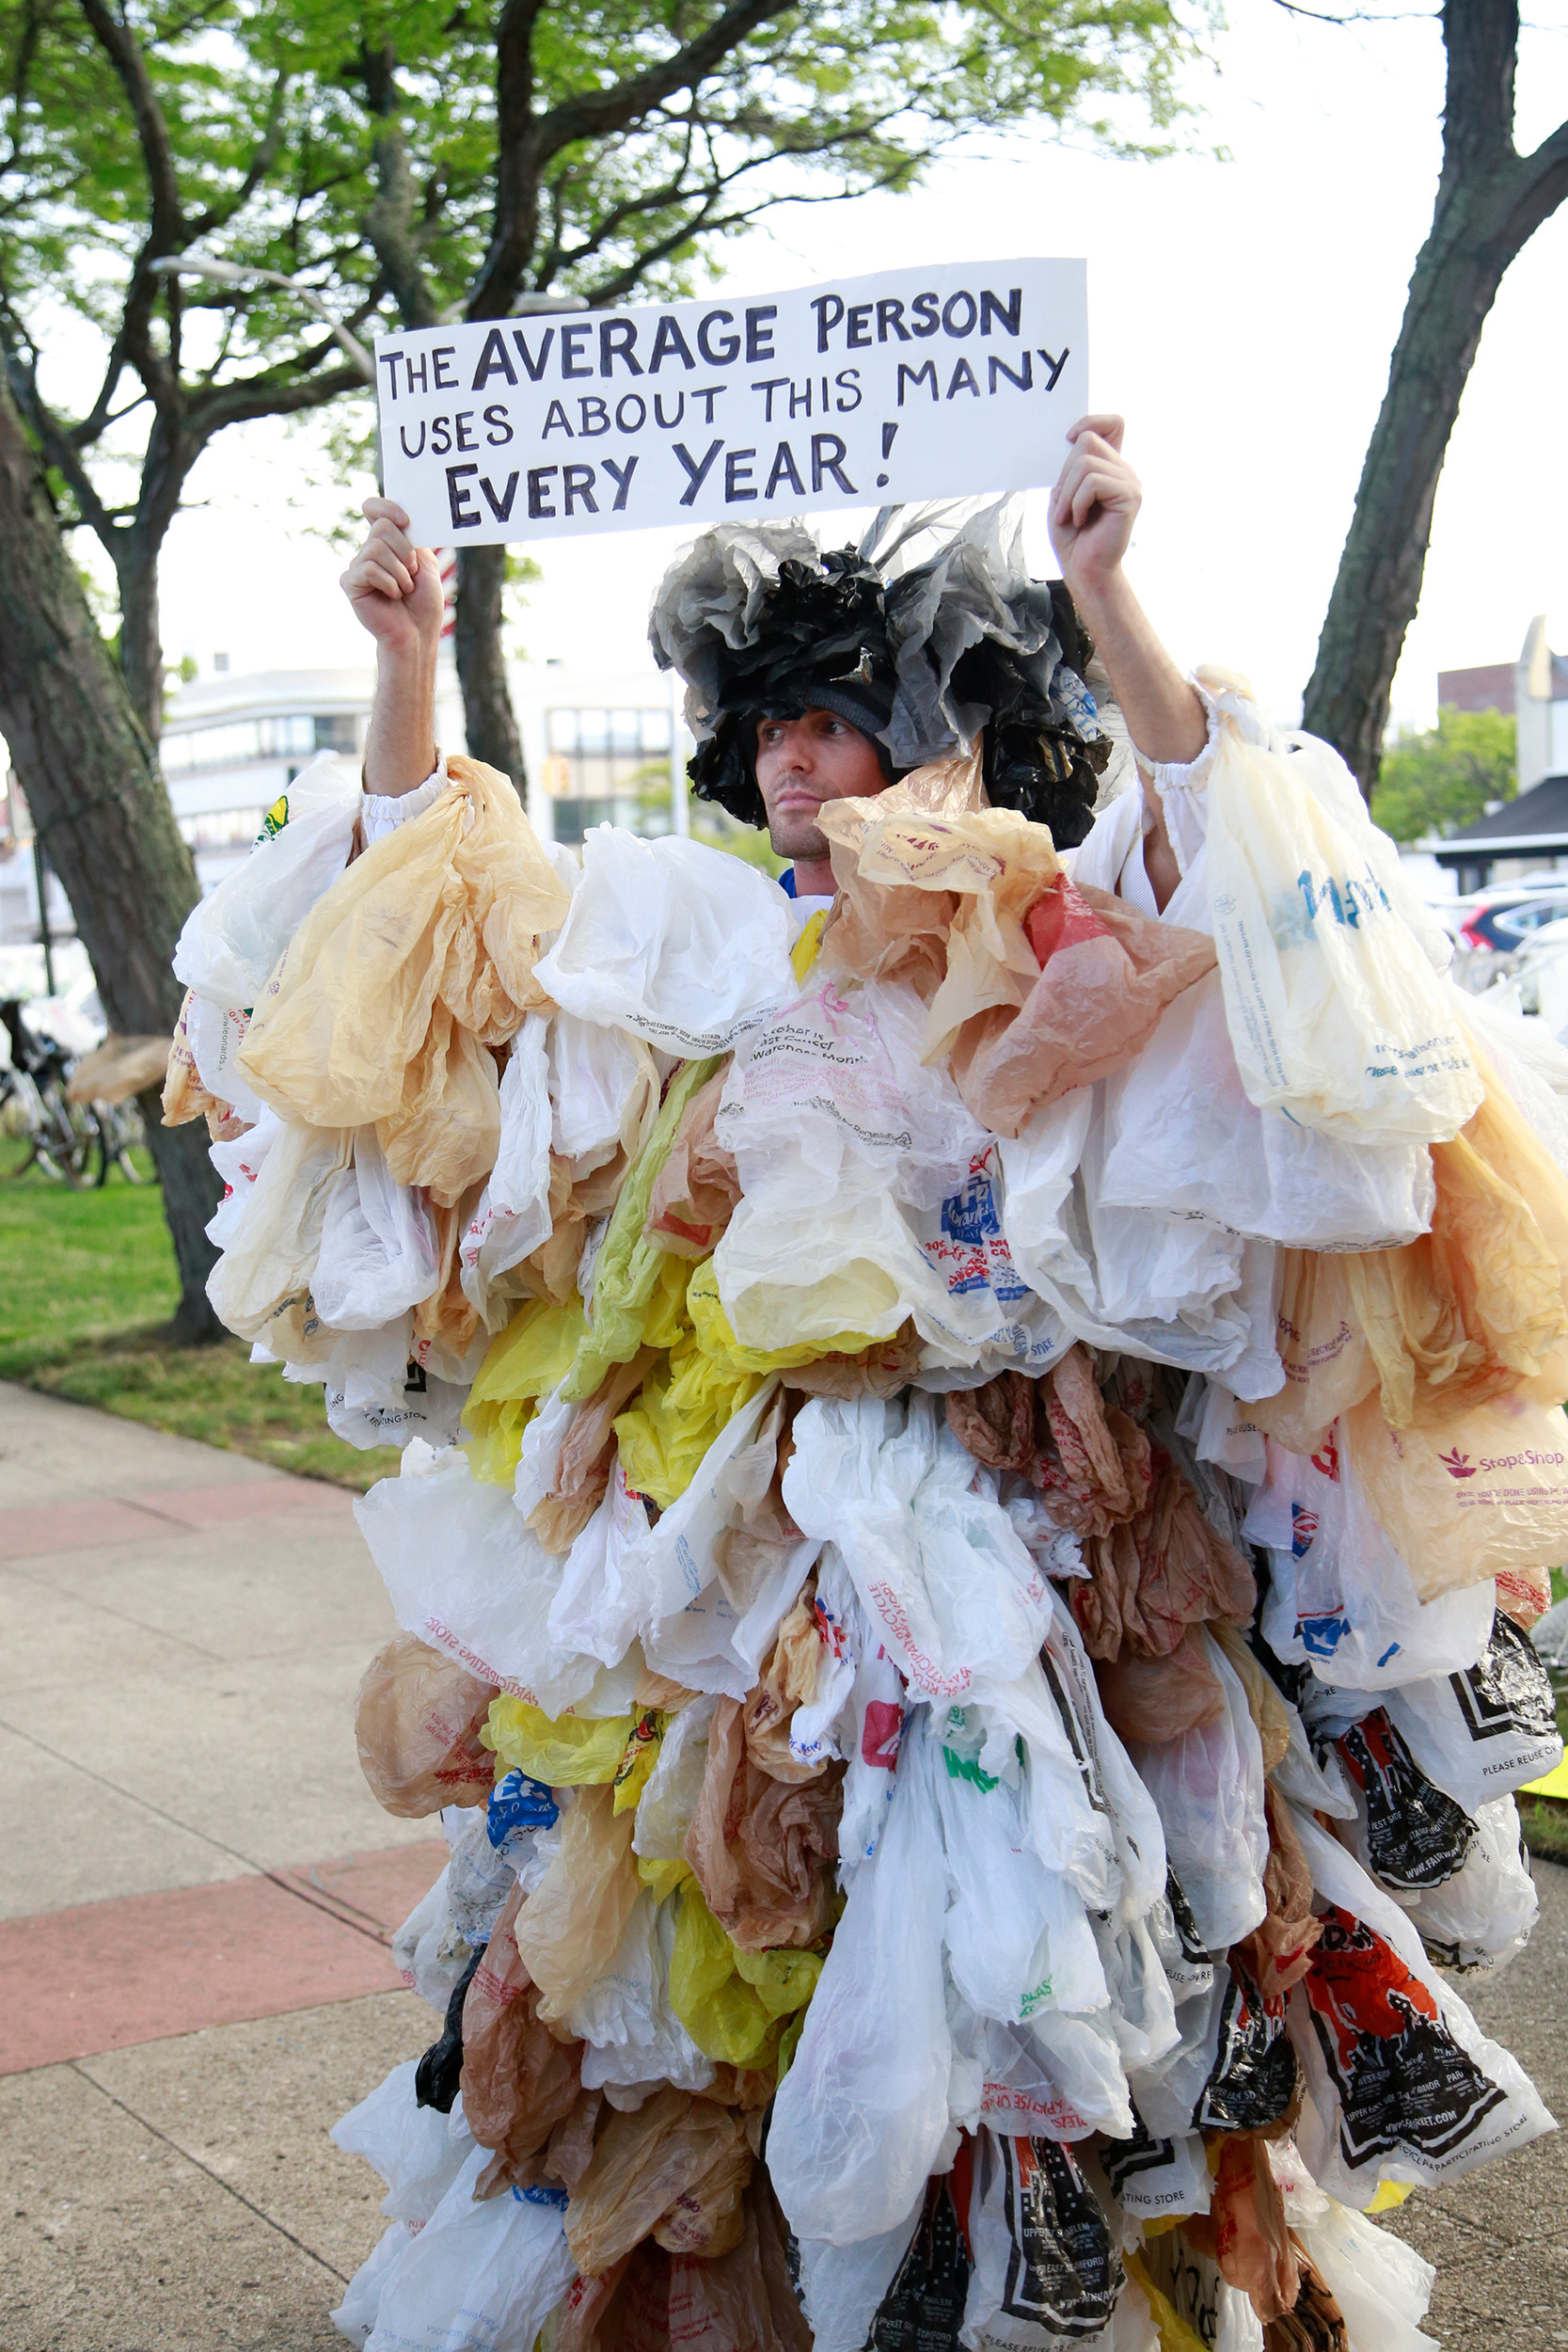 Long Beach resident Joseph Naham stuck hundreds of plastic bags to his body to show how many bags the average person uses in a year.